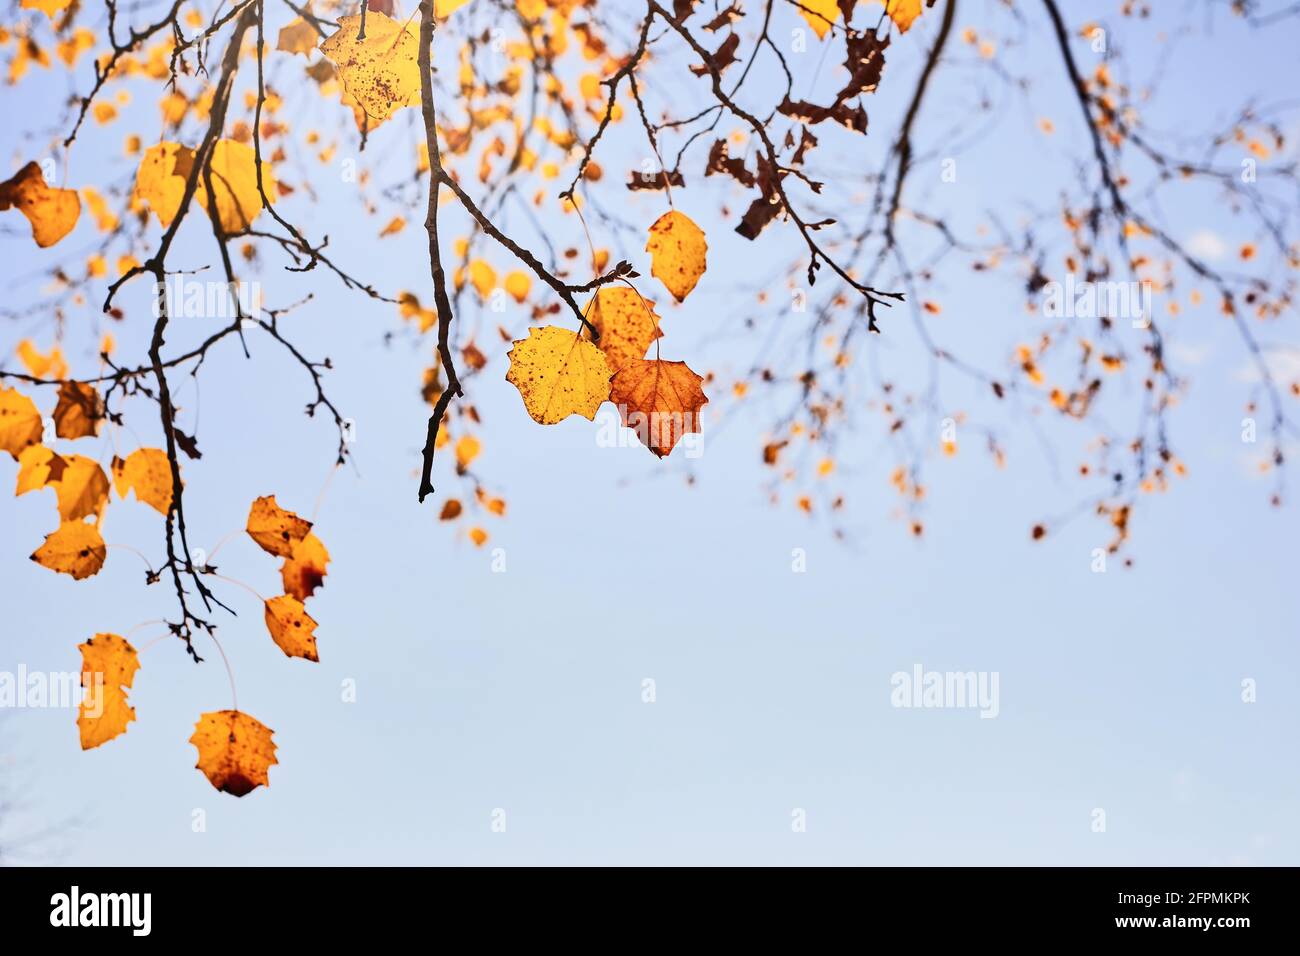 autumn scene with yellow leaves, blurred brown branches and blue sky Stock Photo